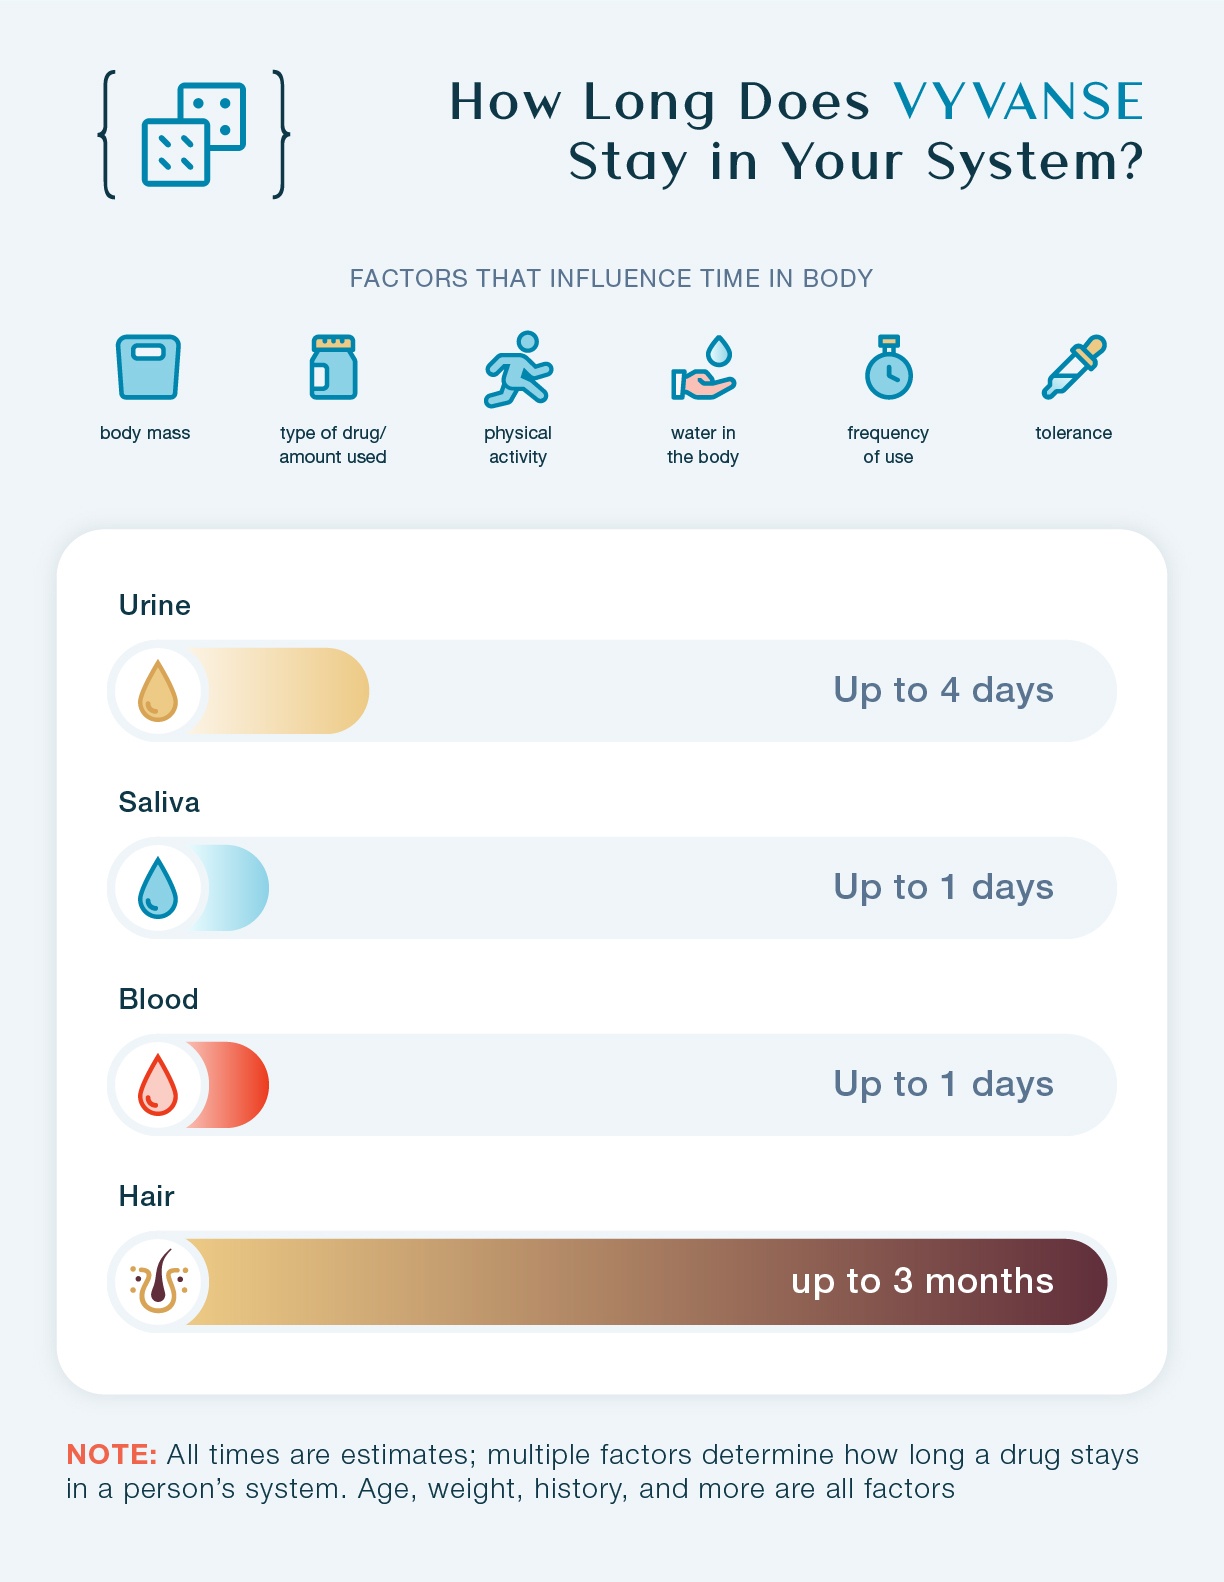 How Long Does Vyvanse Stay In Your System? This chart shows how long Vyvanse stays in urine, saliva, blood, and hair